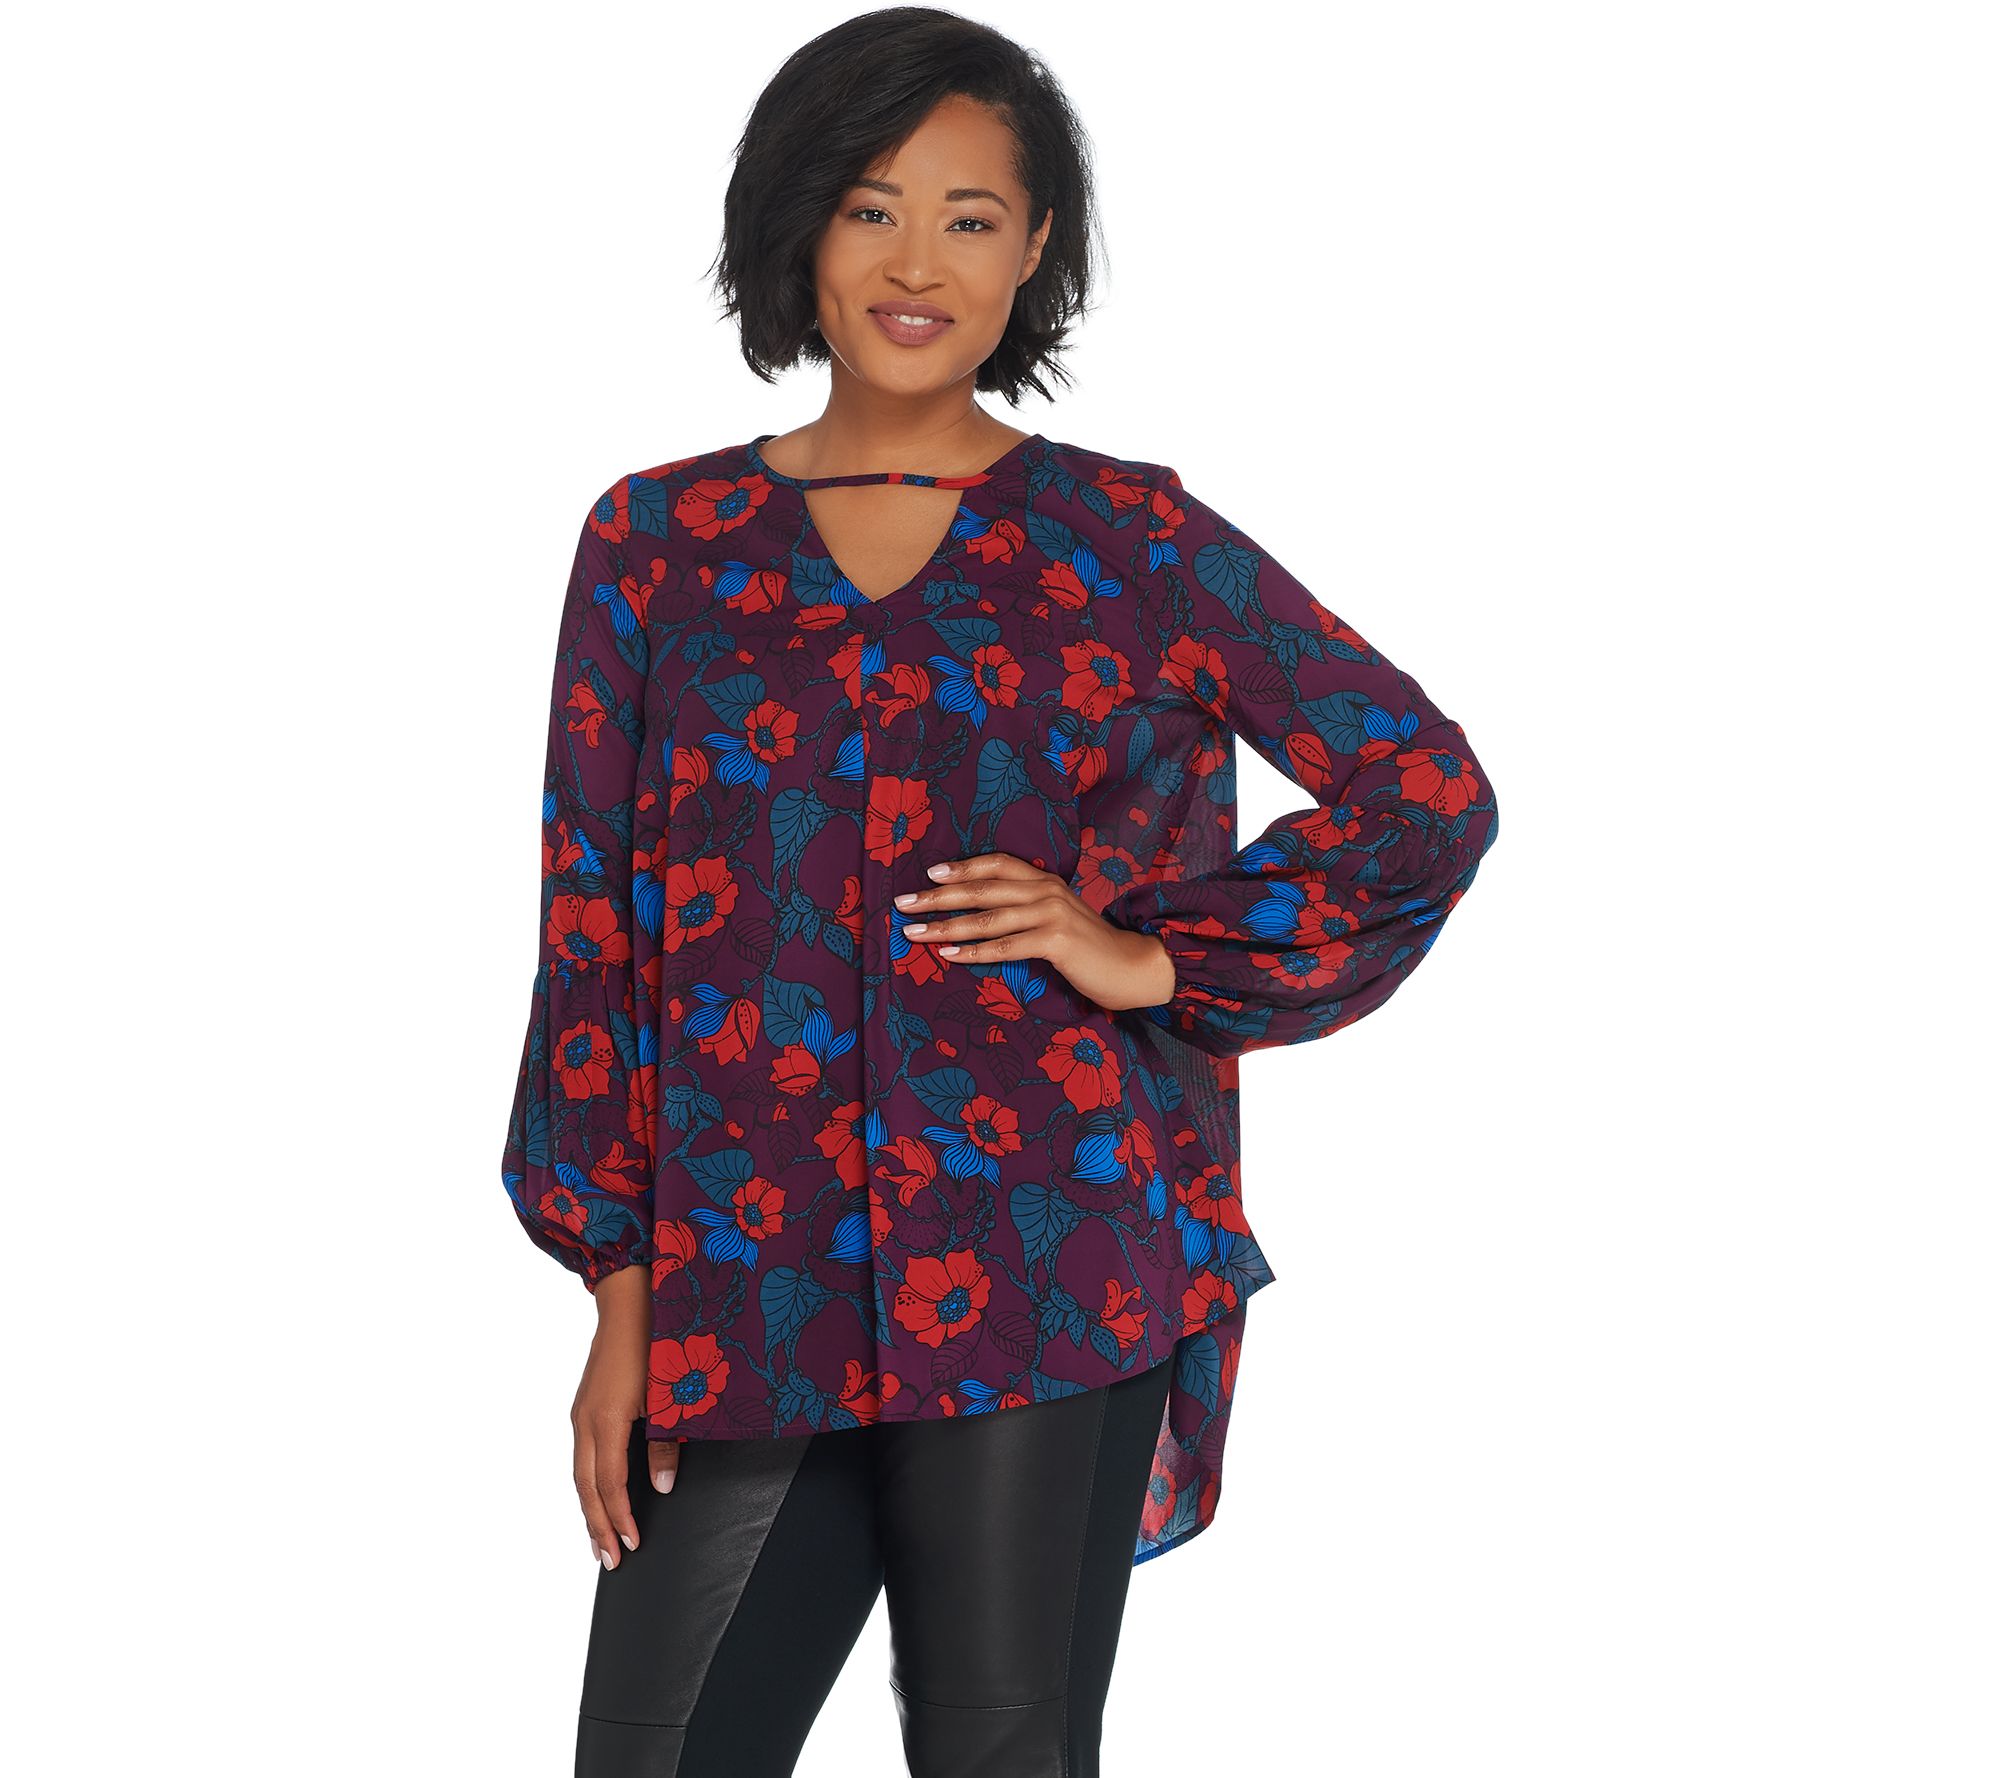 Du Jour Floral Printed Woven Tunic with Balloon Sleeves - QVC.com